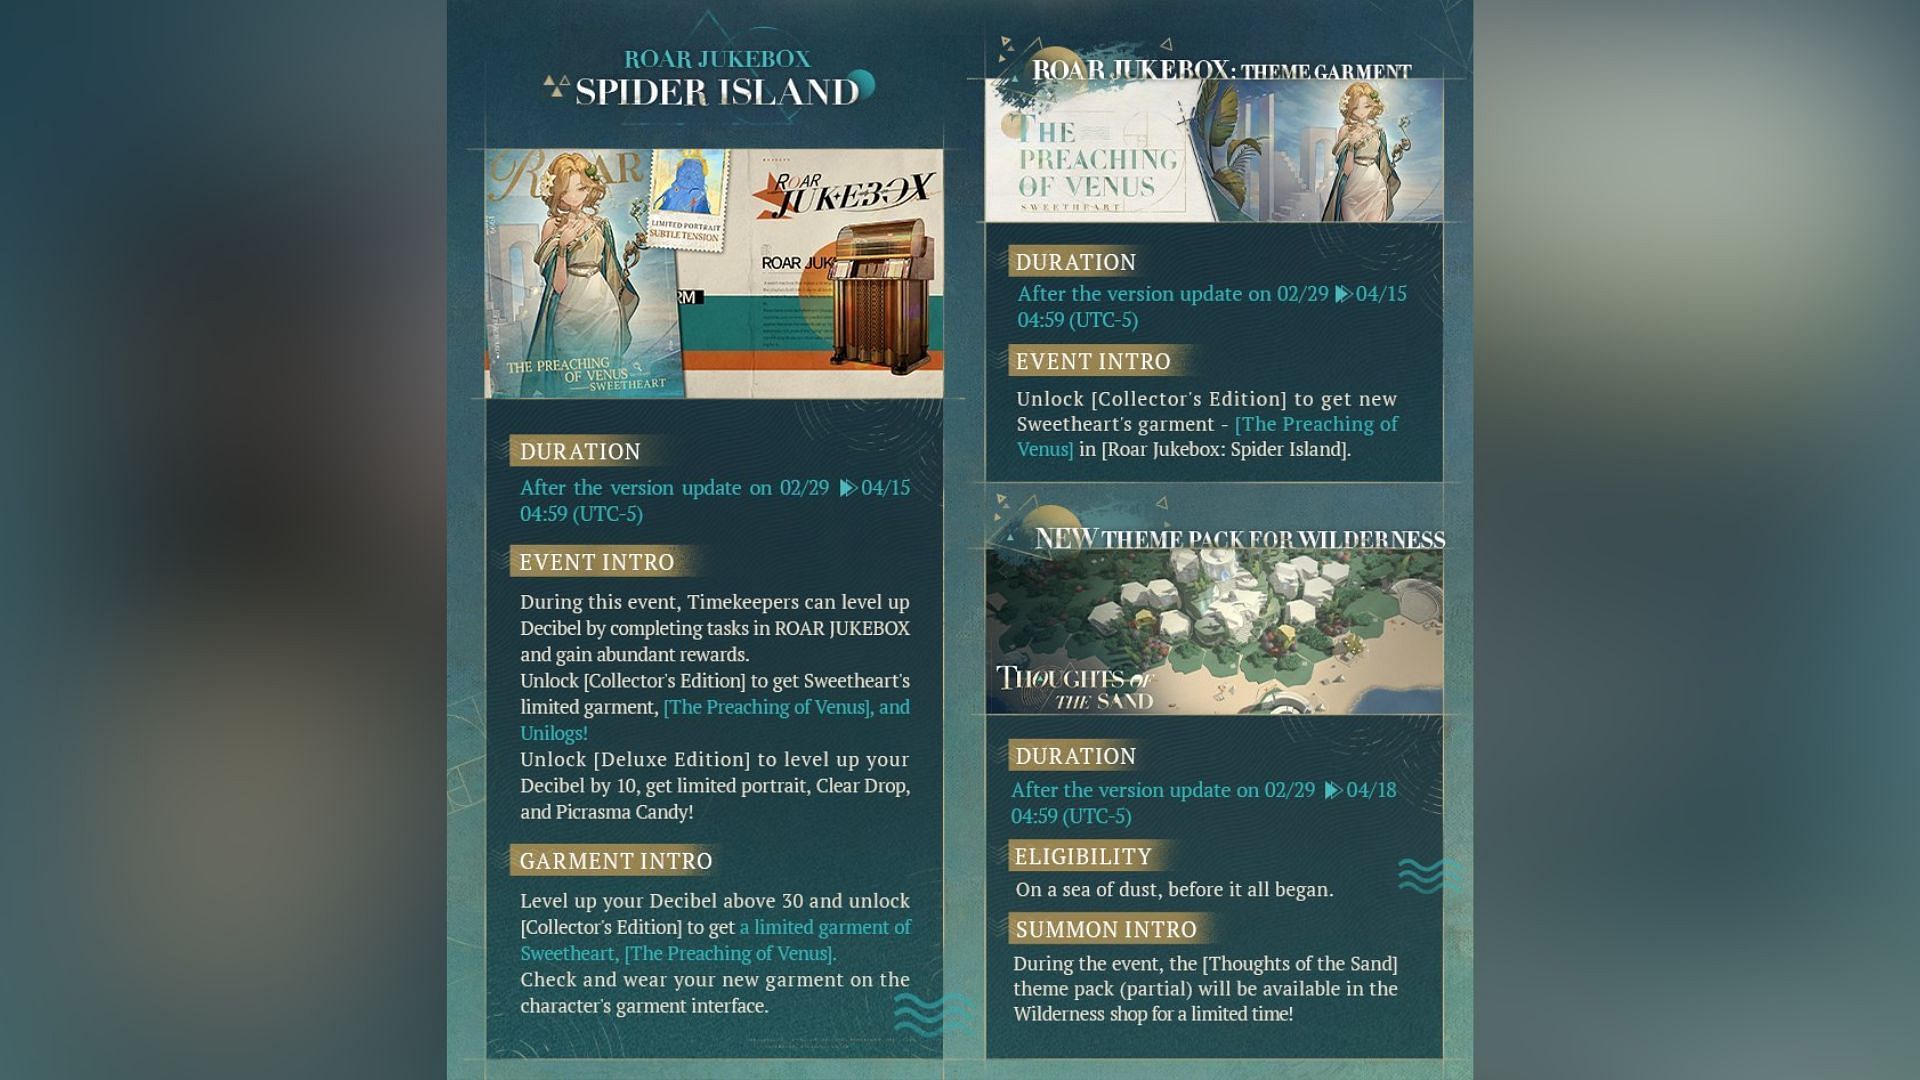 Details of Roar Jukebox - Spider Island and other events posted by Bluepoch on X (Image via Bluepoch)